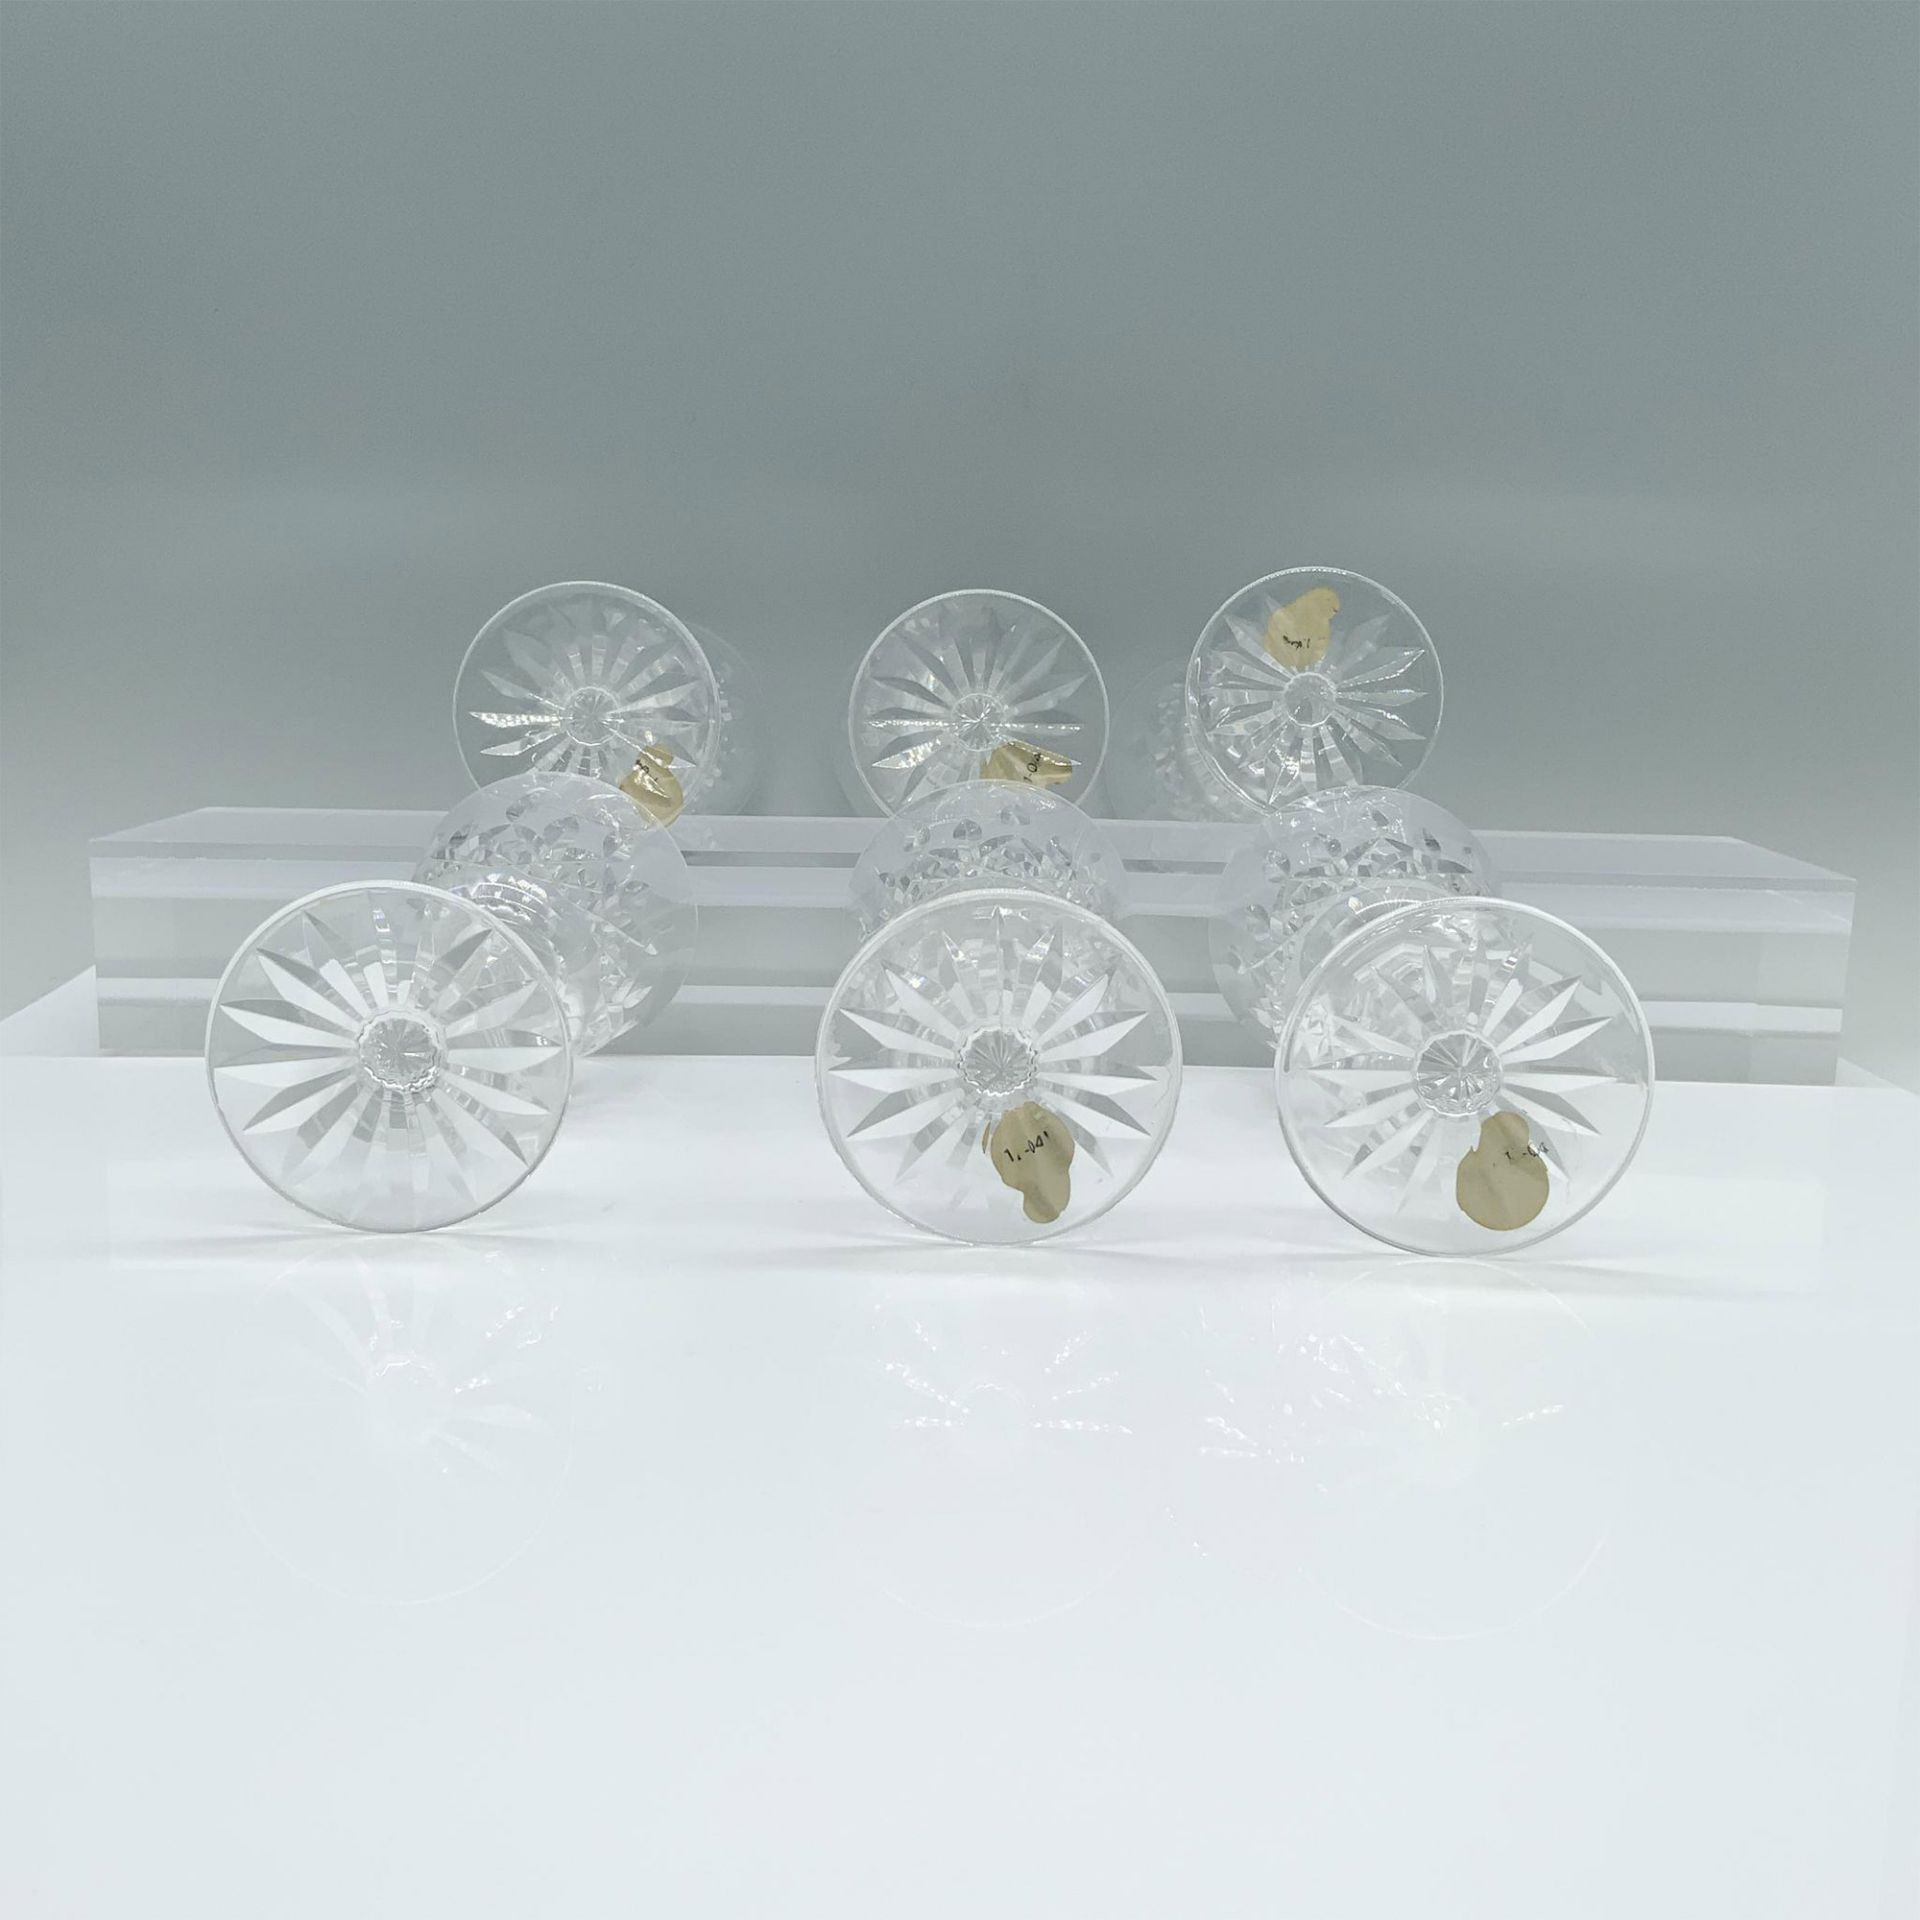 6pc Waterford Crystal White Wine Glasses, Lismore - Image 3 of 4